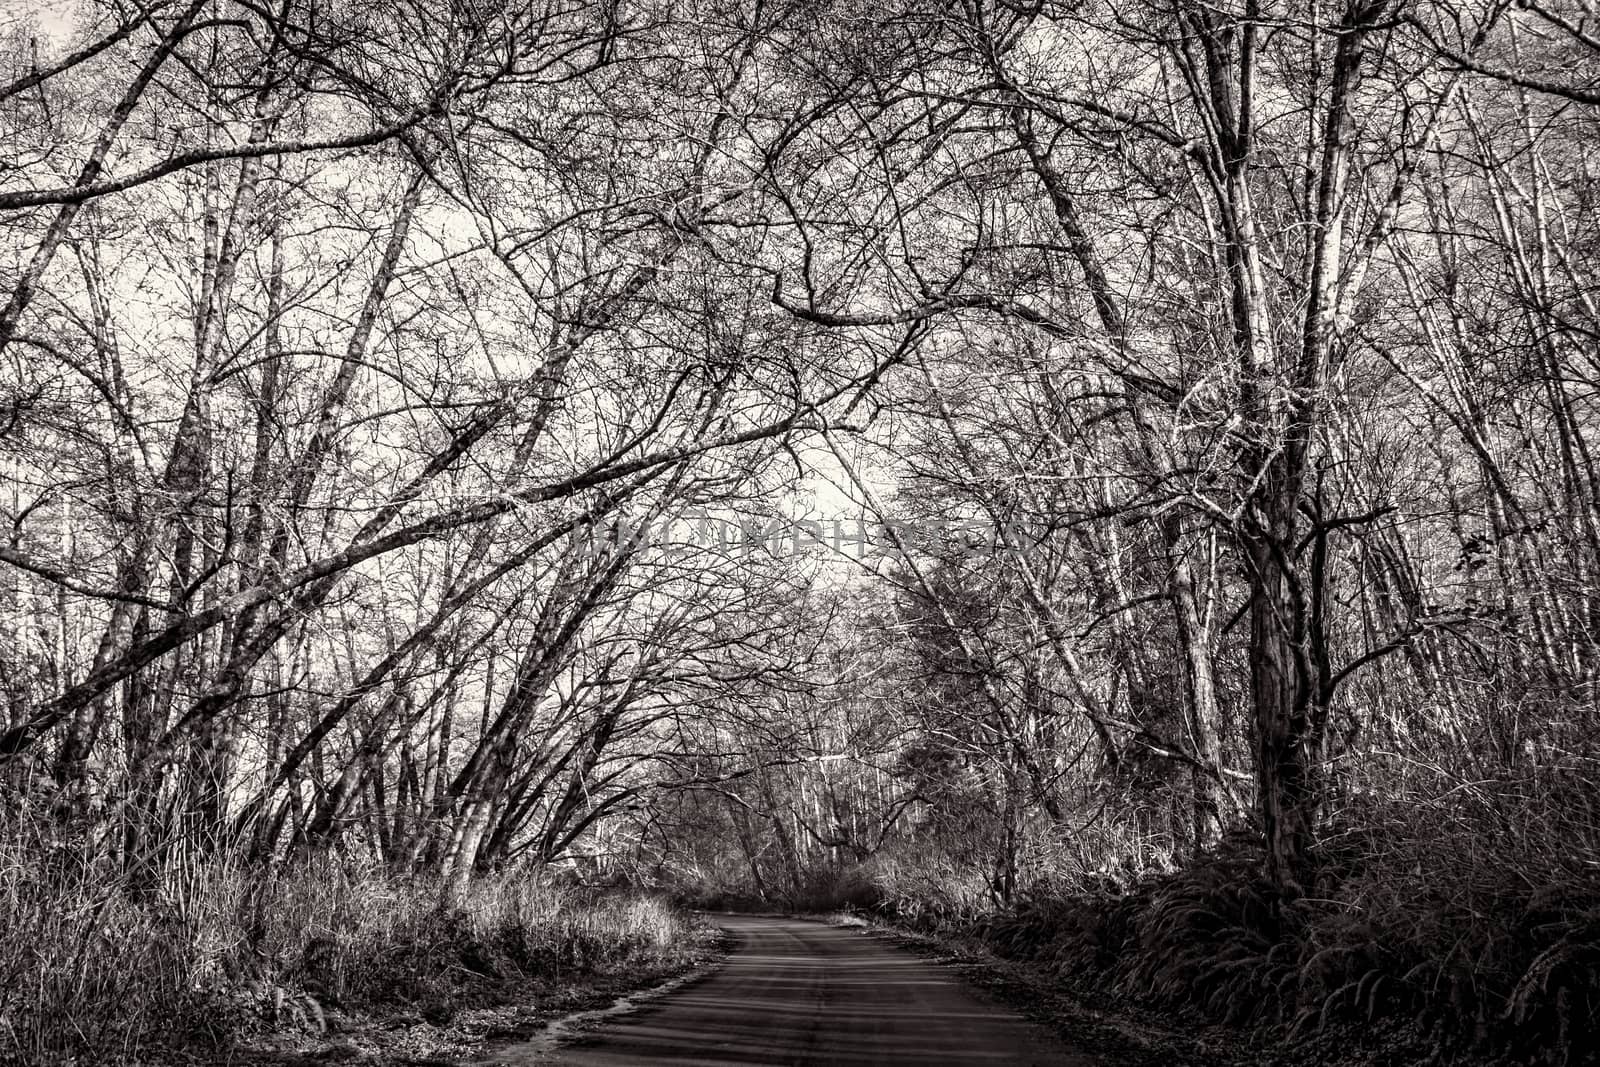 Tree-Lined Road, Black and White, Landscape by backyard_photography